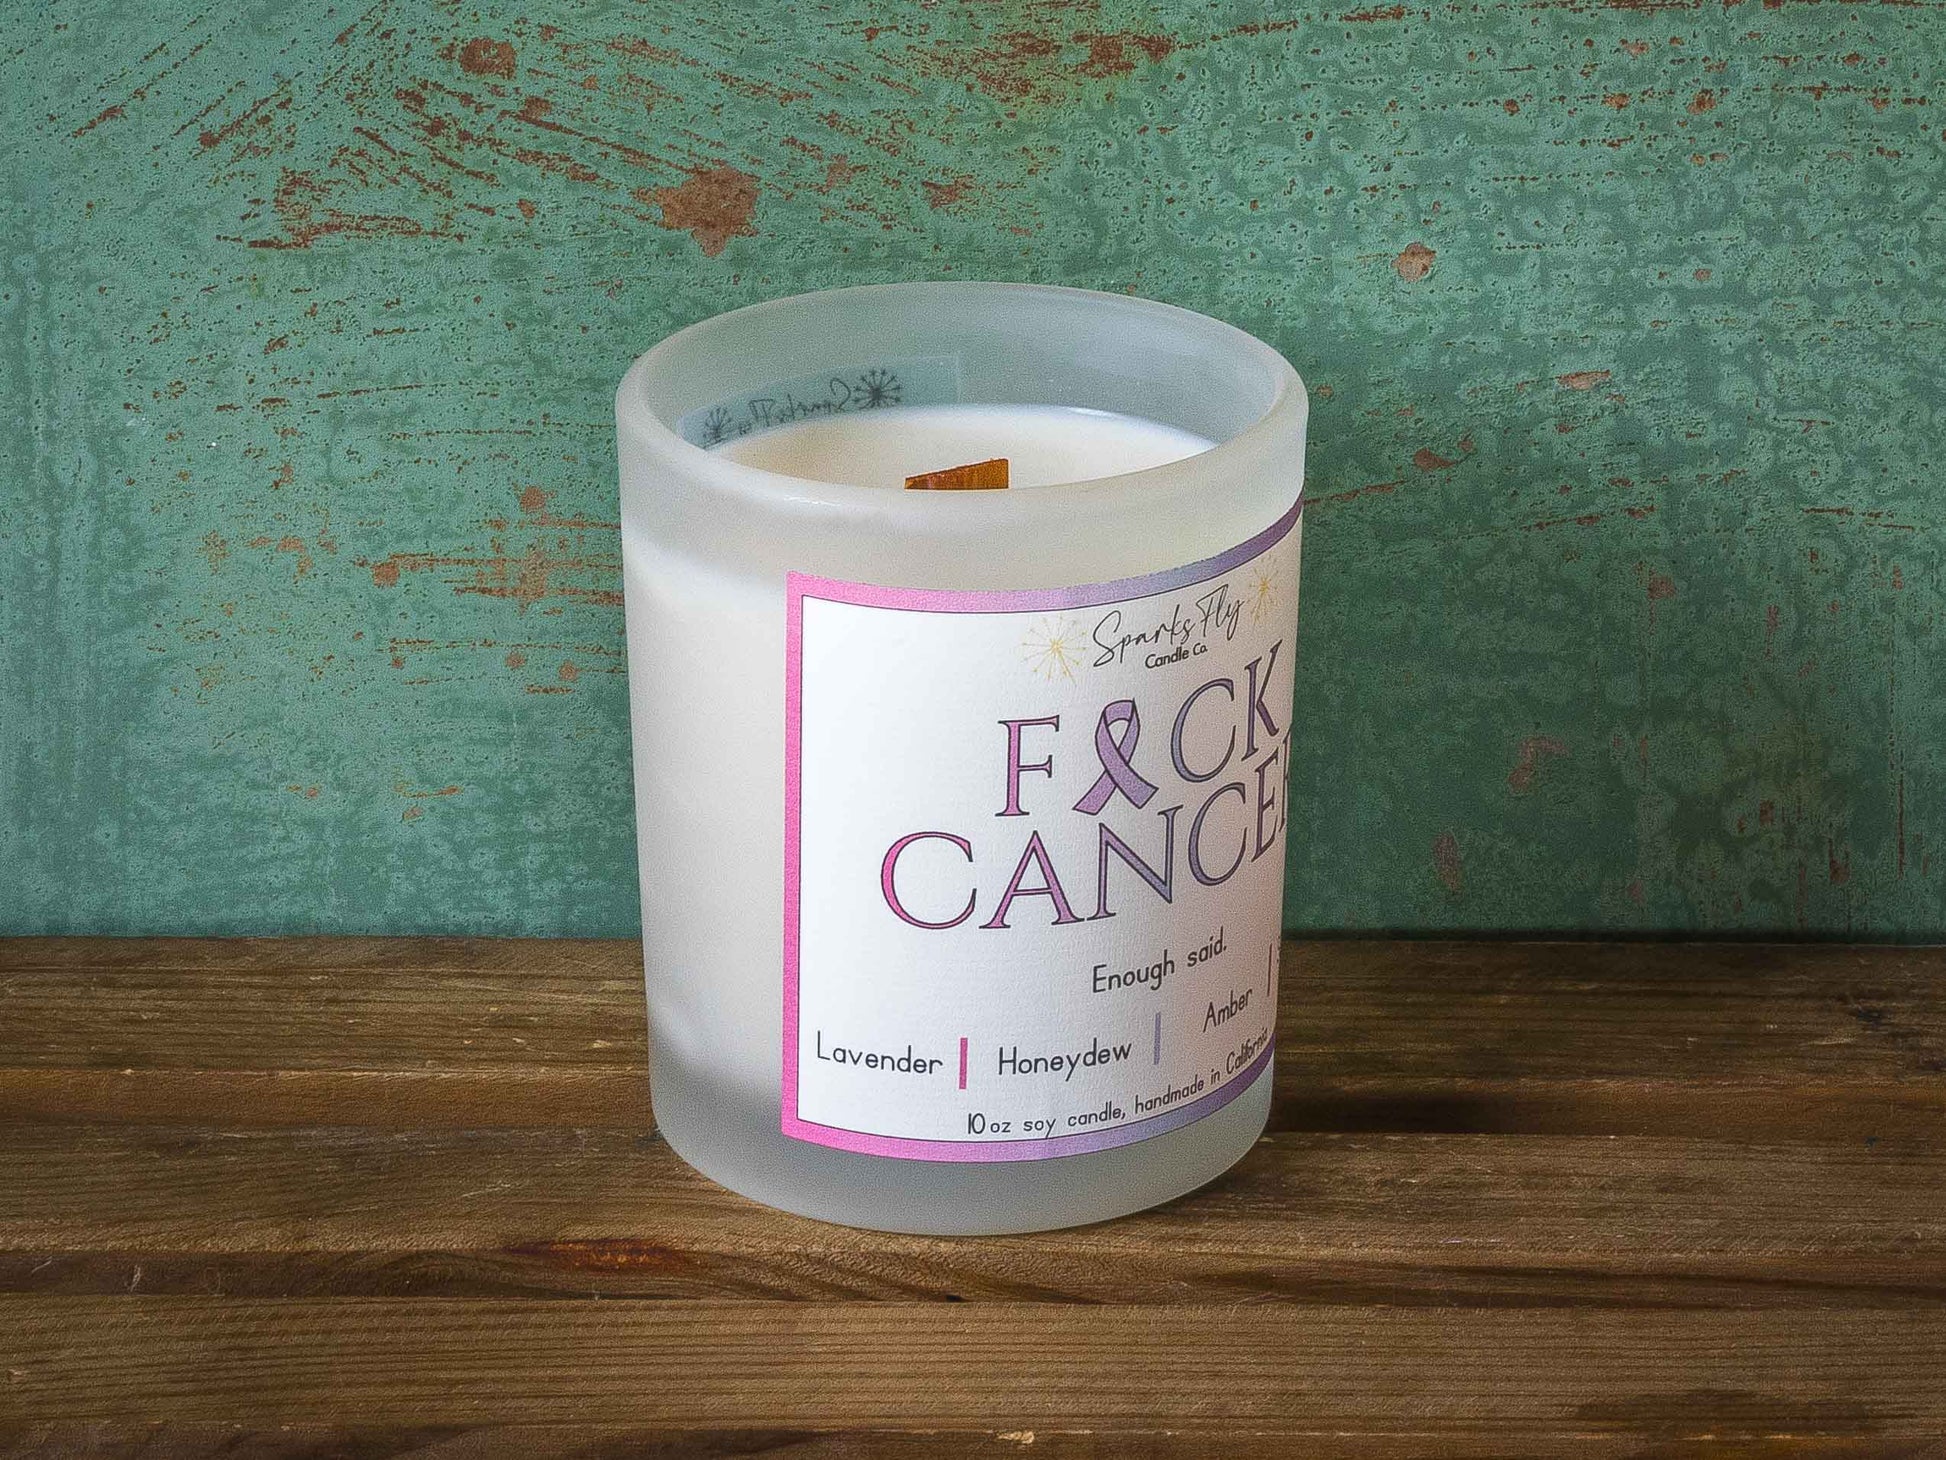 Fuck Cancer Candle - A bold statement against the battle we all stand against.